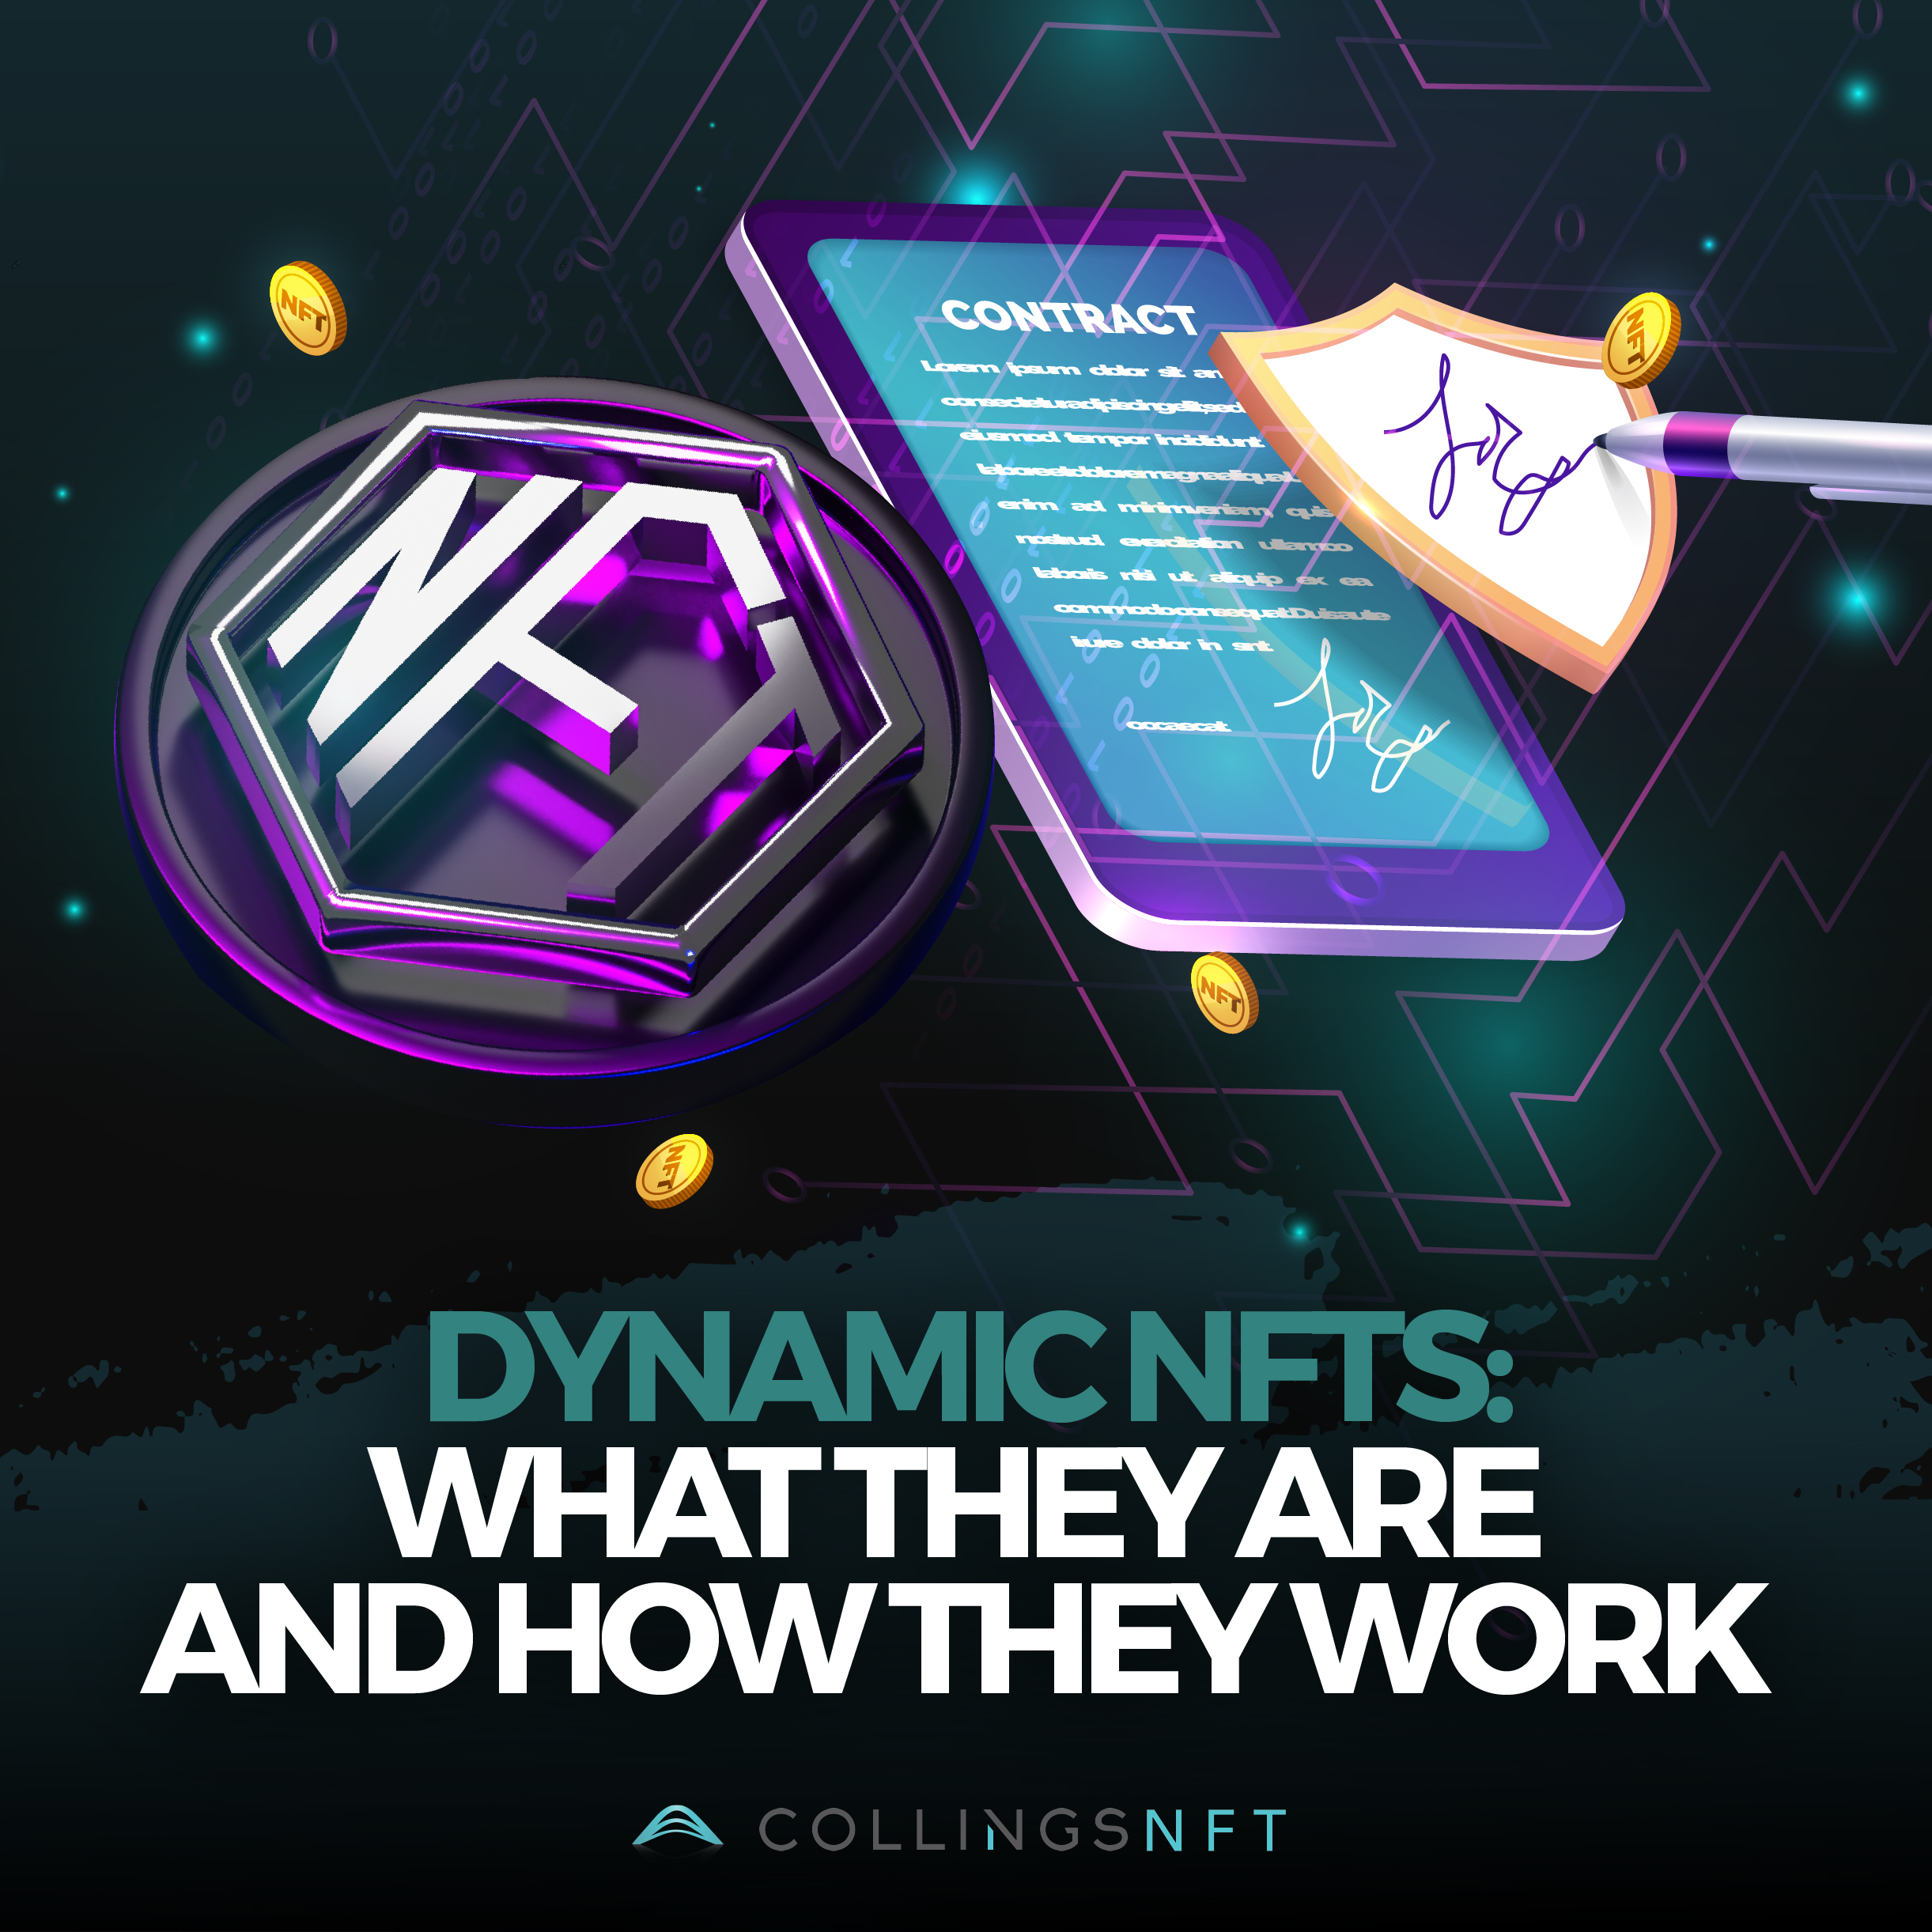 Dynamic NFTs: What Are They and How They Work